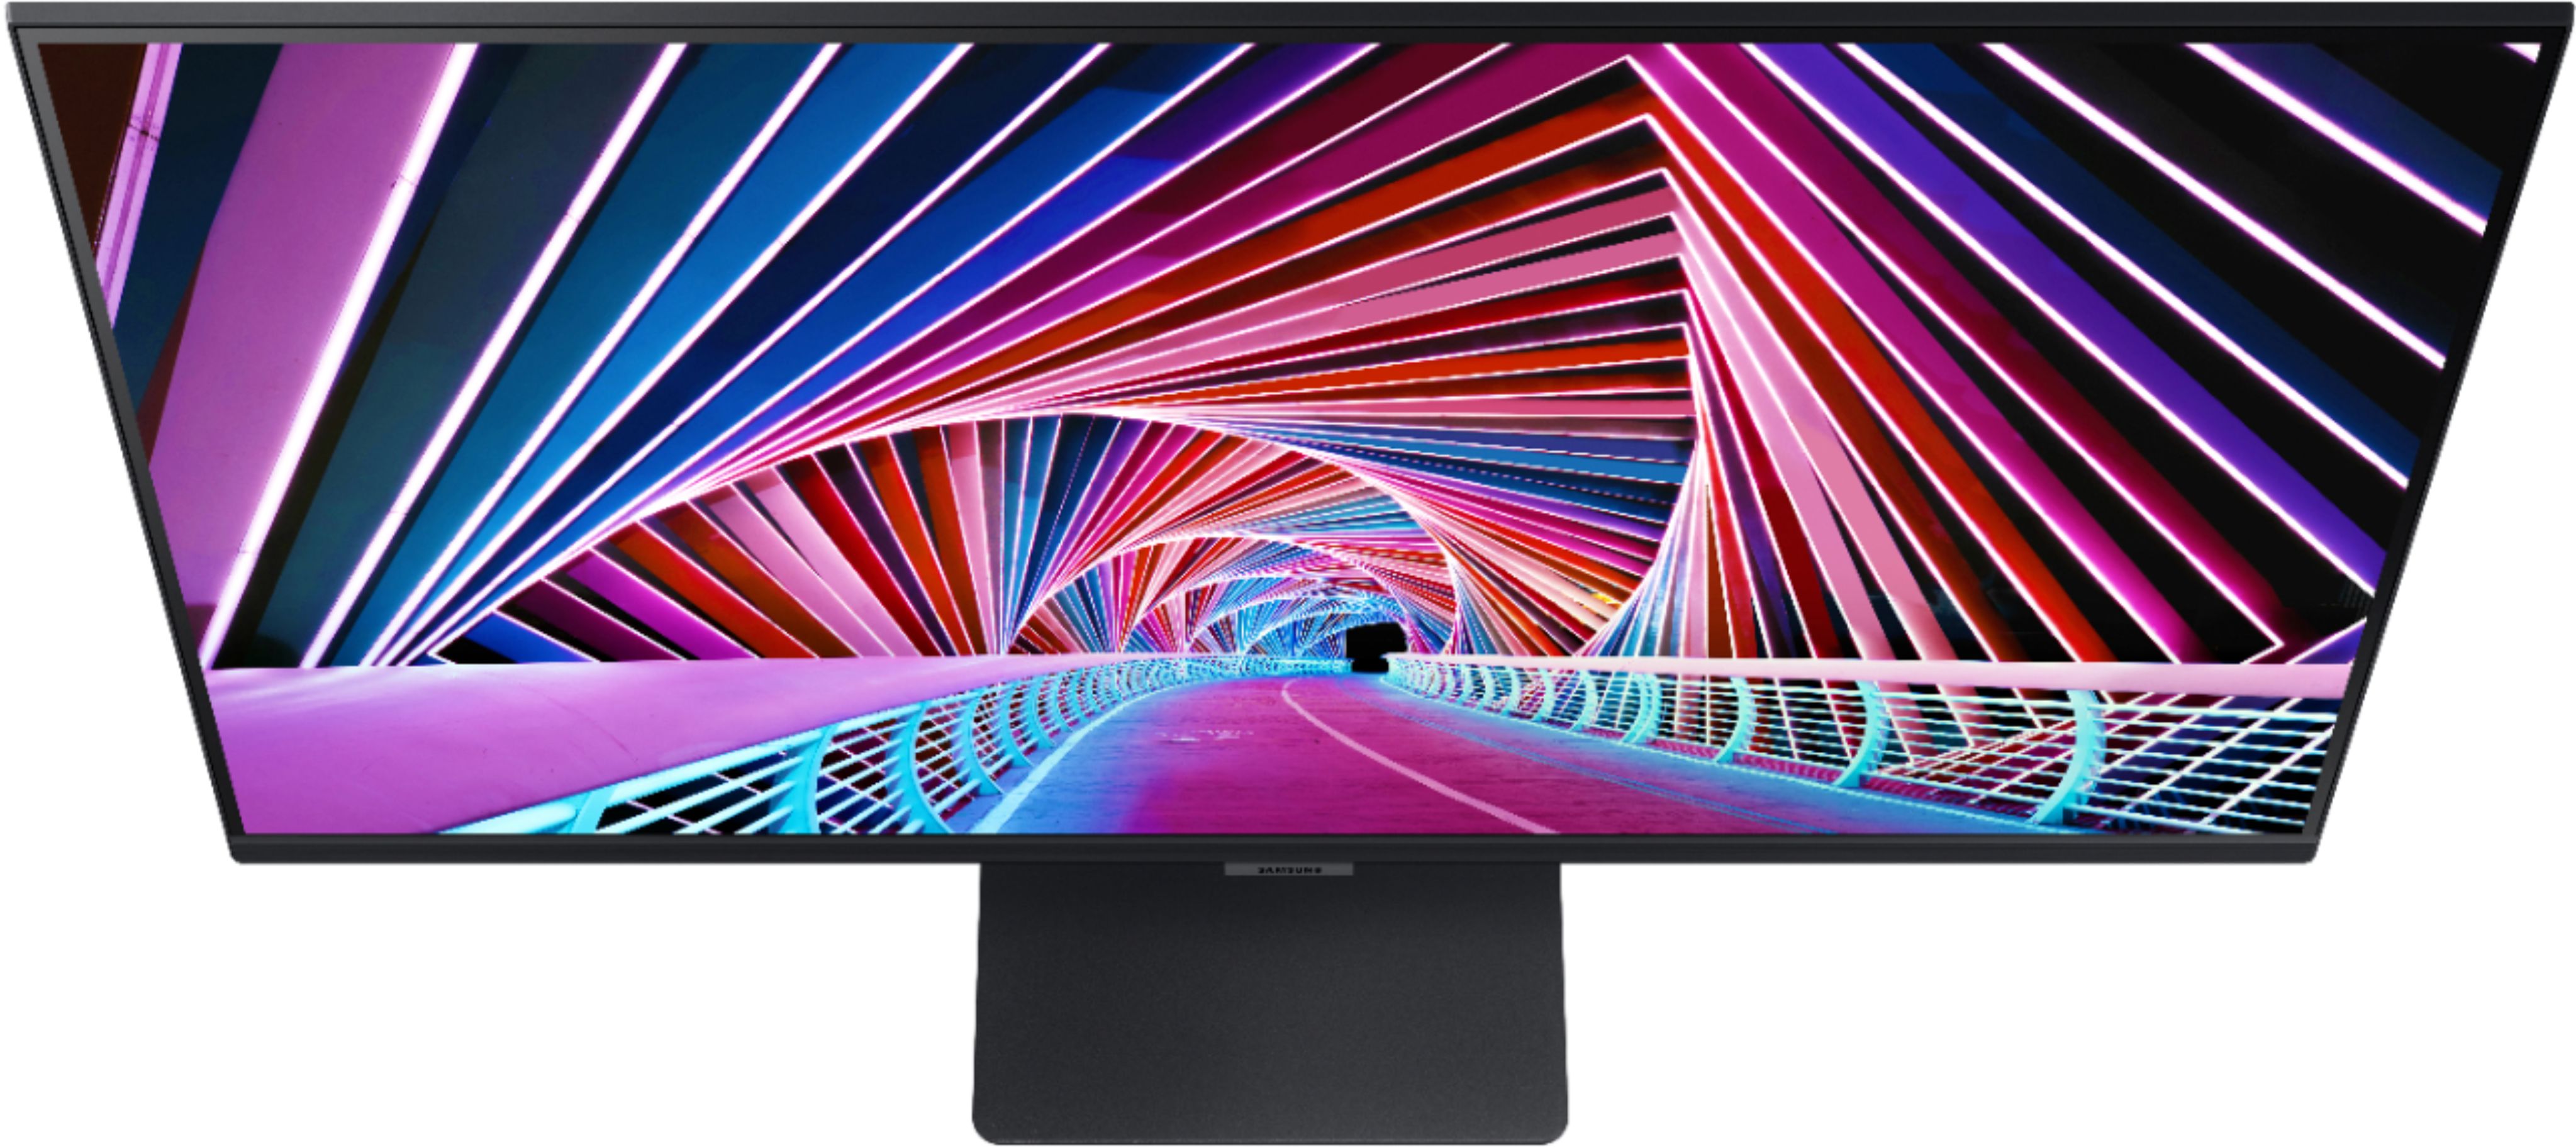 Samsung's curved 32-inch 4K Mini LED monitor goes on sale for $1,500 - The  Verge